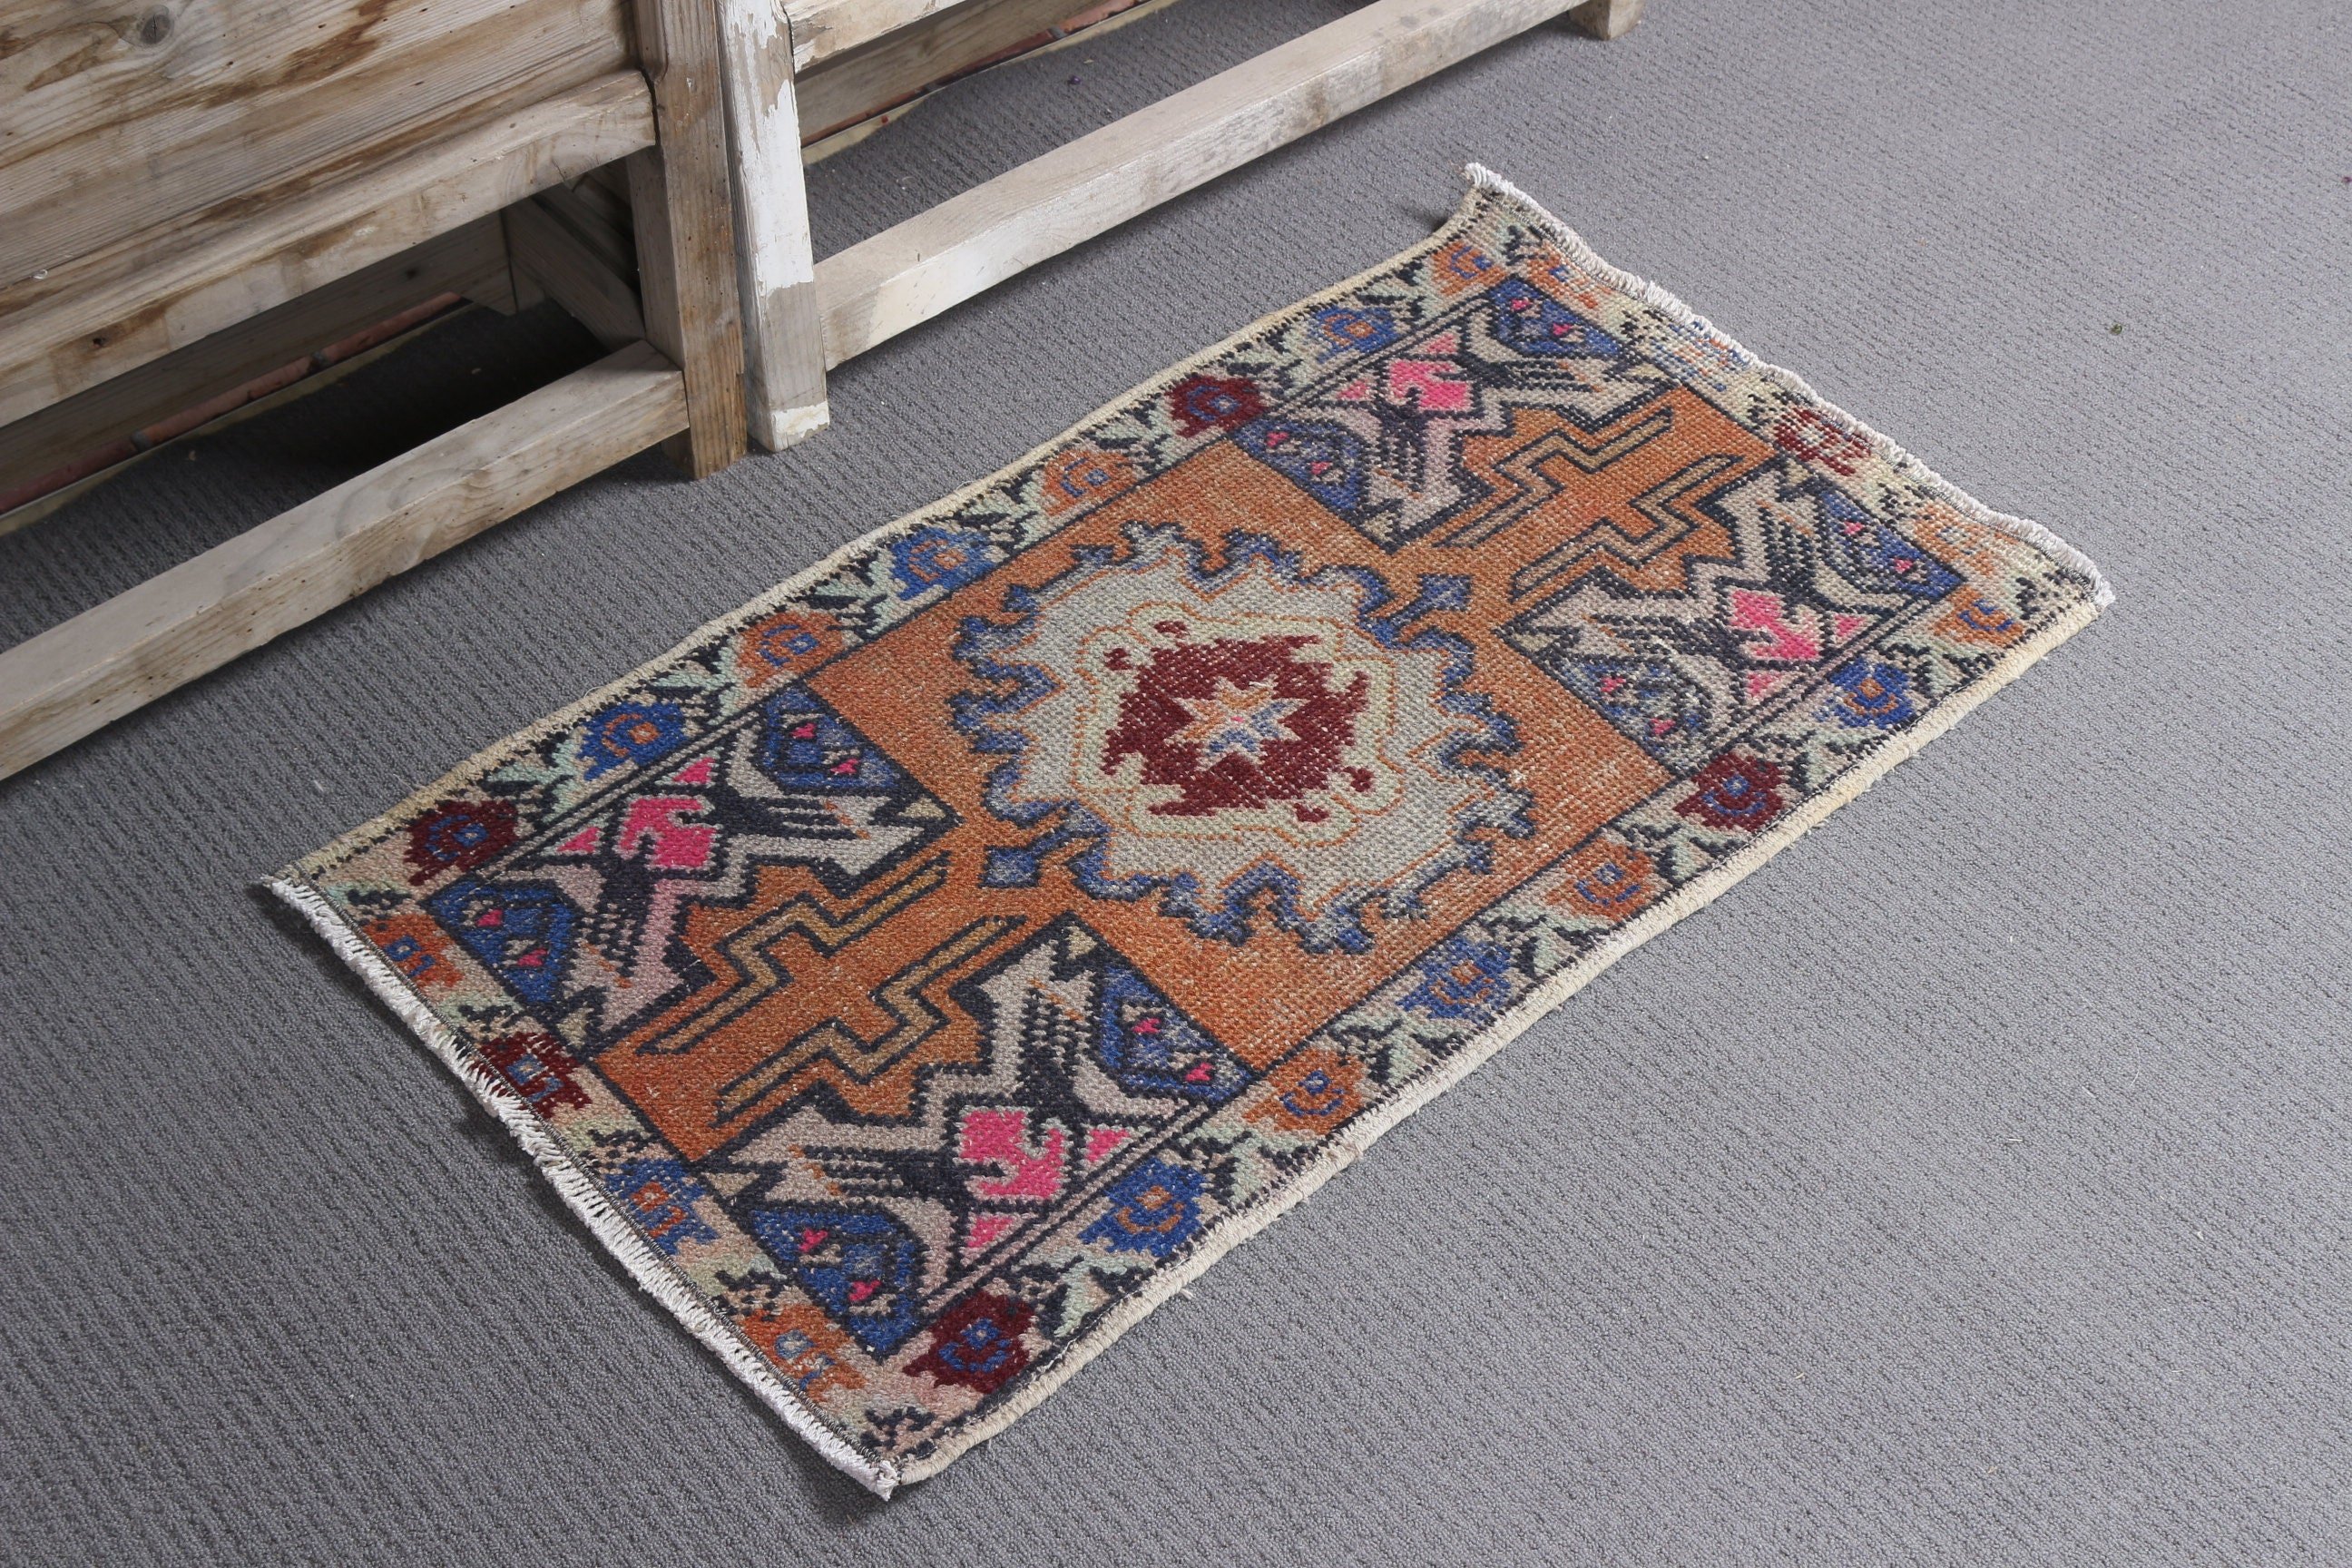 Home Decor Rug, Door Mat Rug, Brown Kitchen Rugs, Turkish Rug, Vintage Rug, Car Mat Rugs, Ethnic Rugs, 1.7x3.1 ft Small Rugs, Kitchen Rug